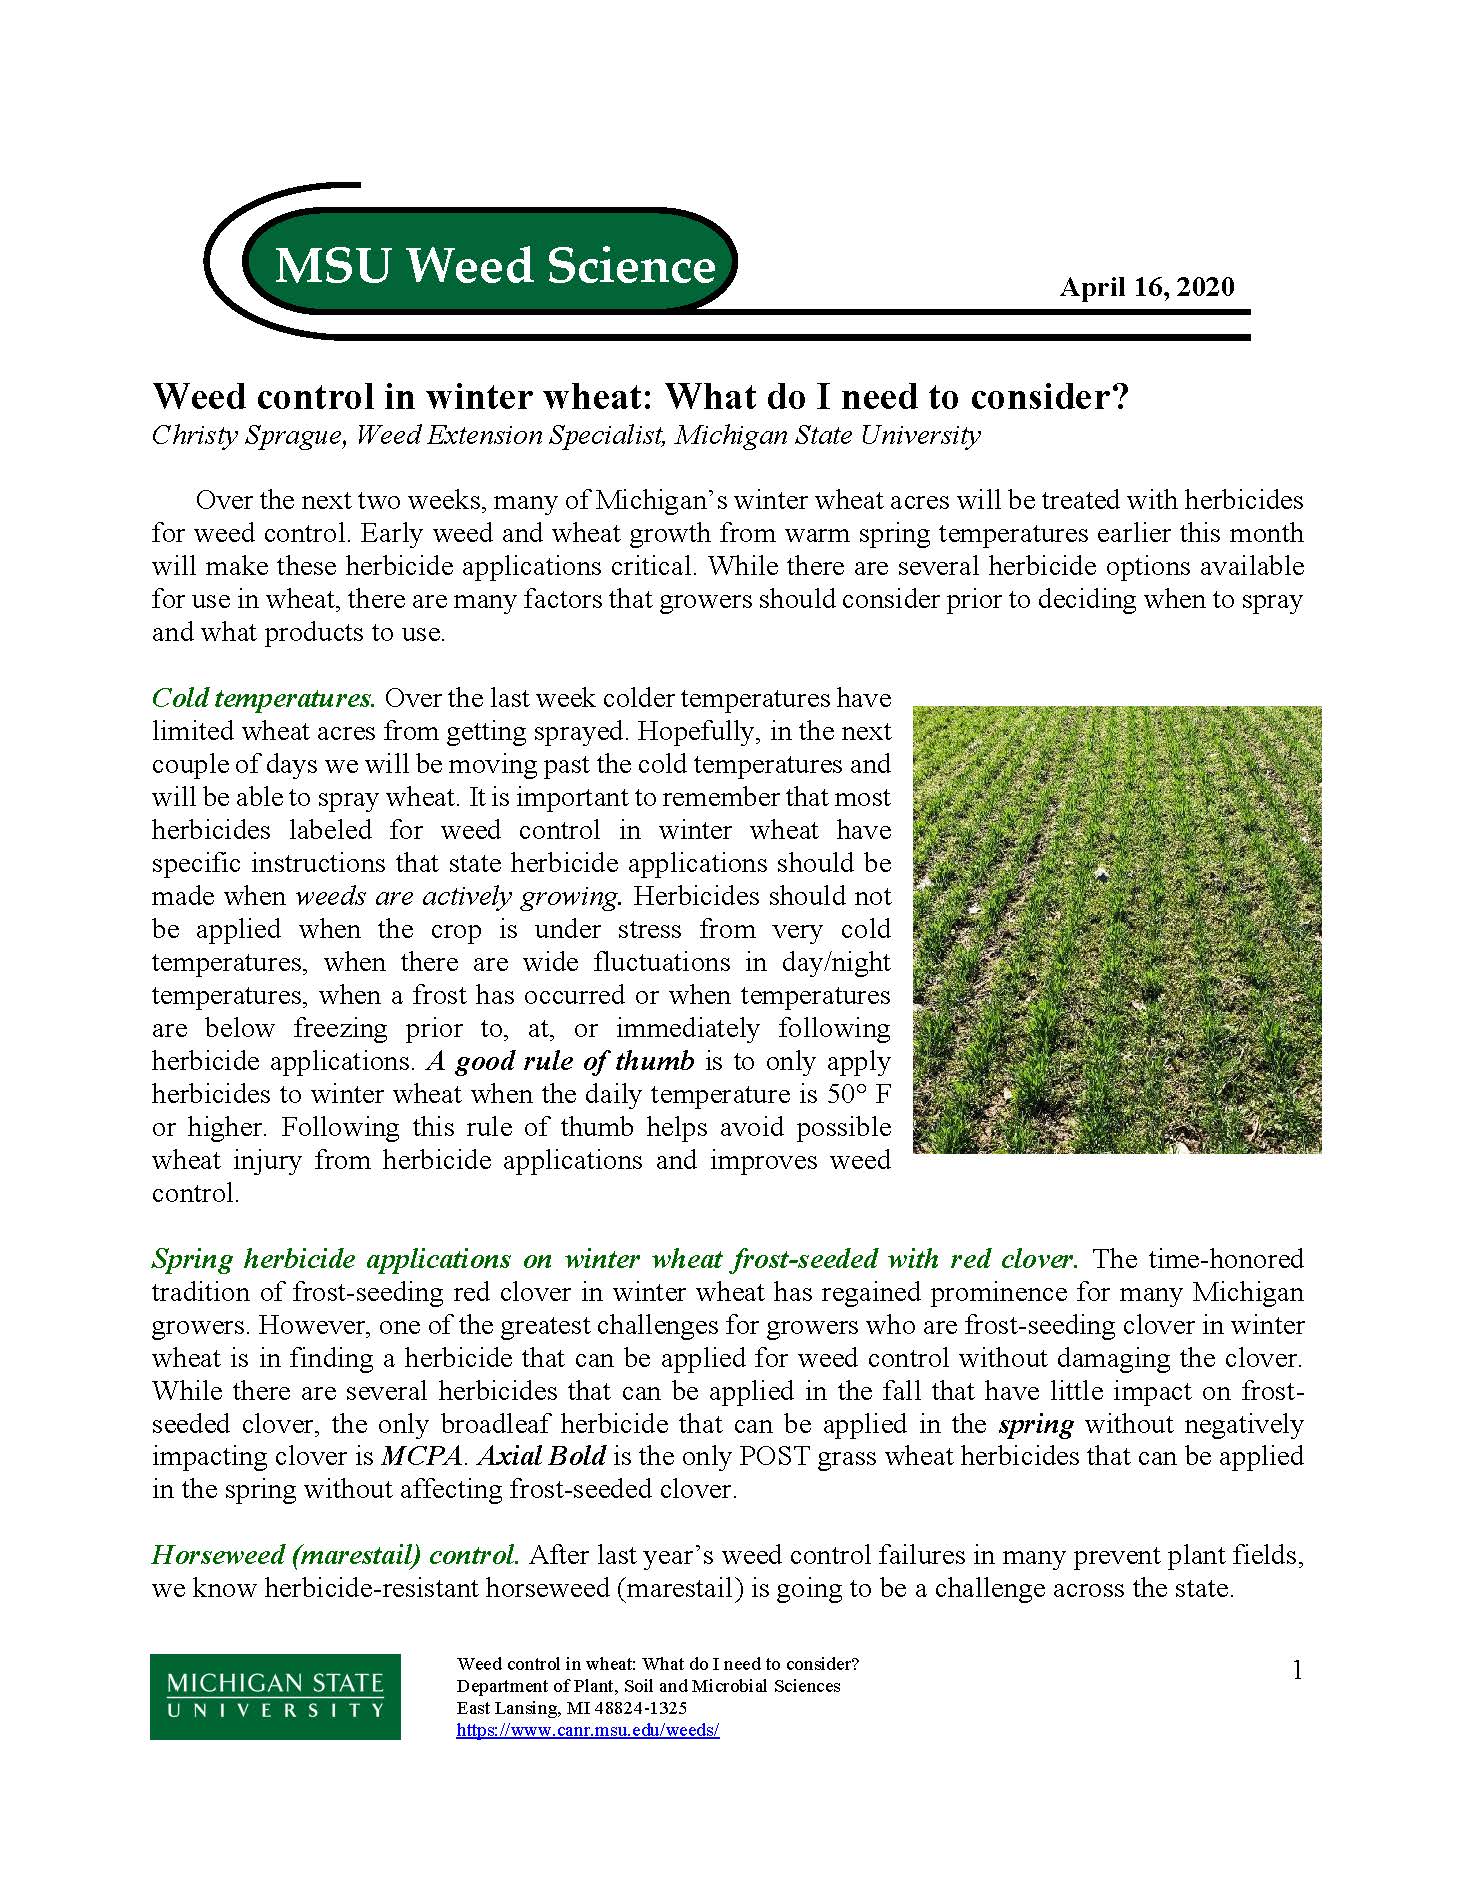 16APR20 Weed Control in Wheat_Page_1